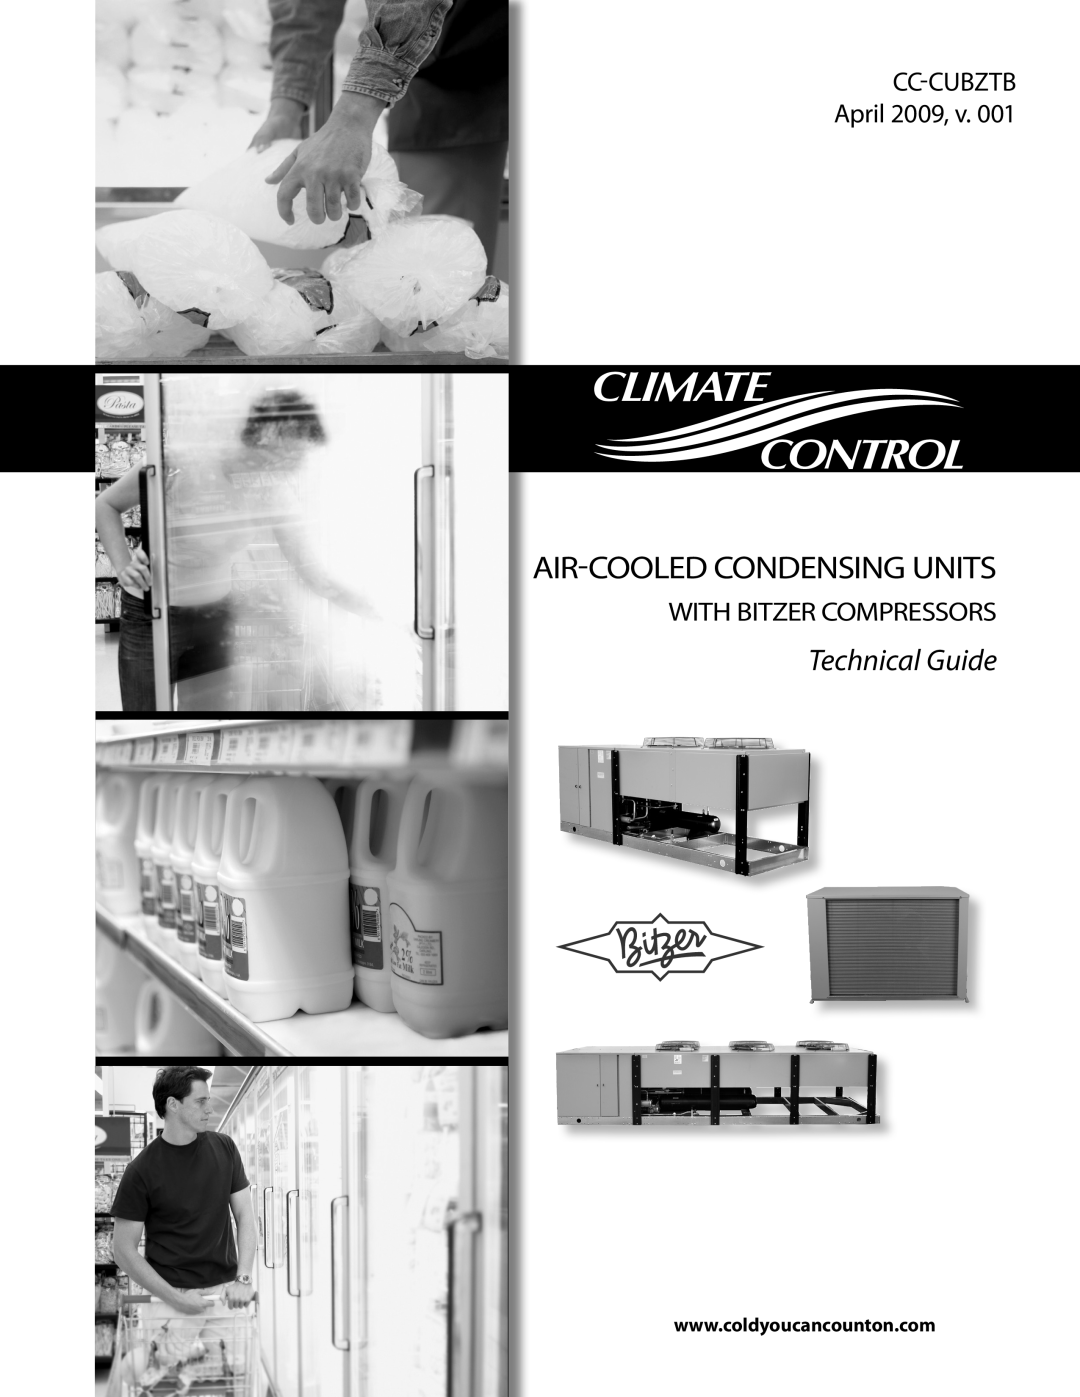 Heatcraft Refrigeration Products CC-CUBZTB manual Climate Control, Air-Cooledcondensing Units, Technical Guide 